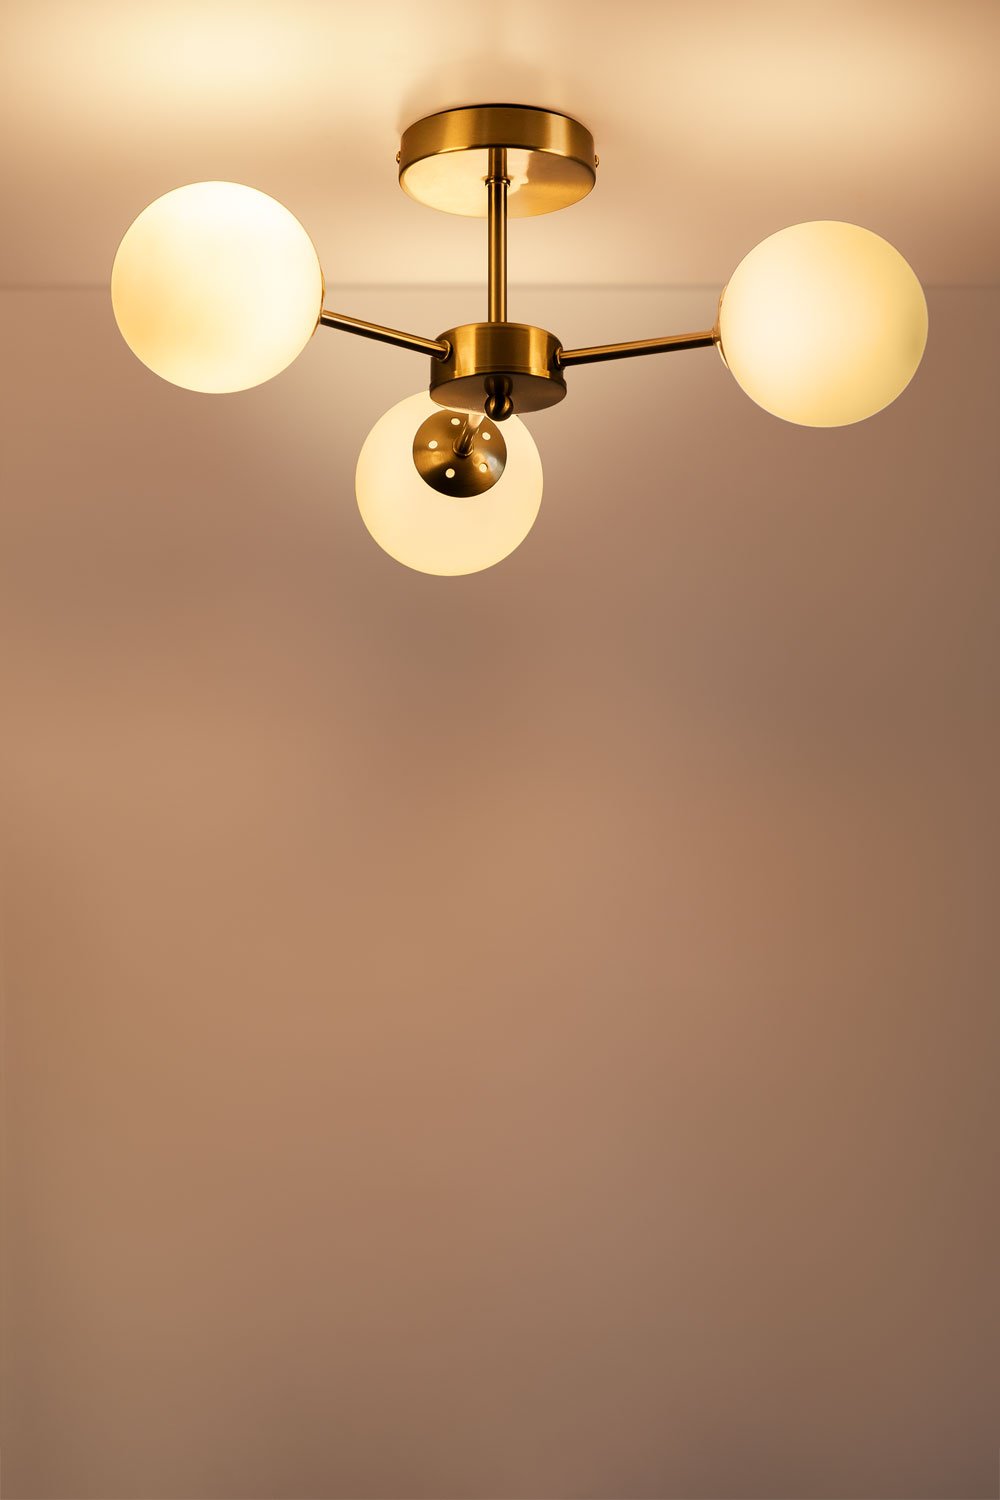 Uvol ceiling lamp with 3 glass balls , gallery image 2